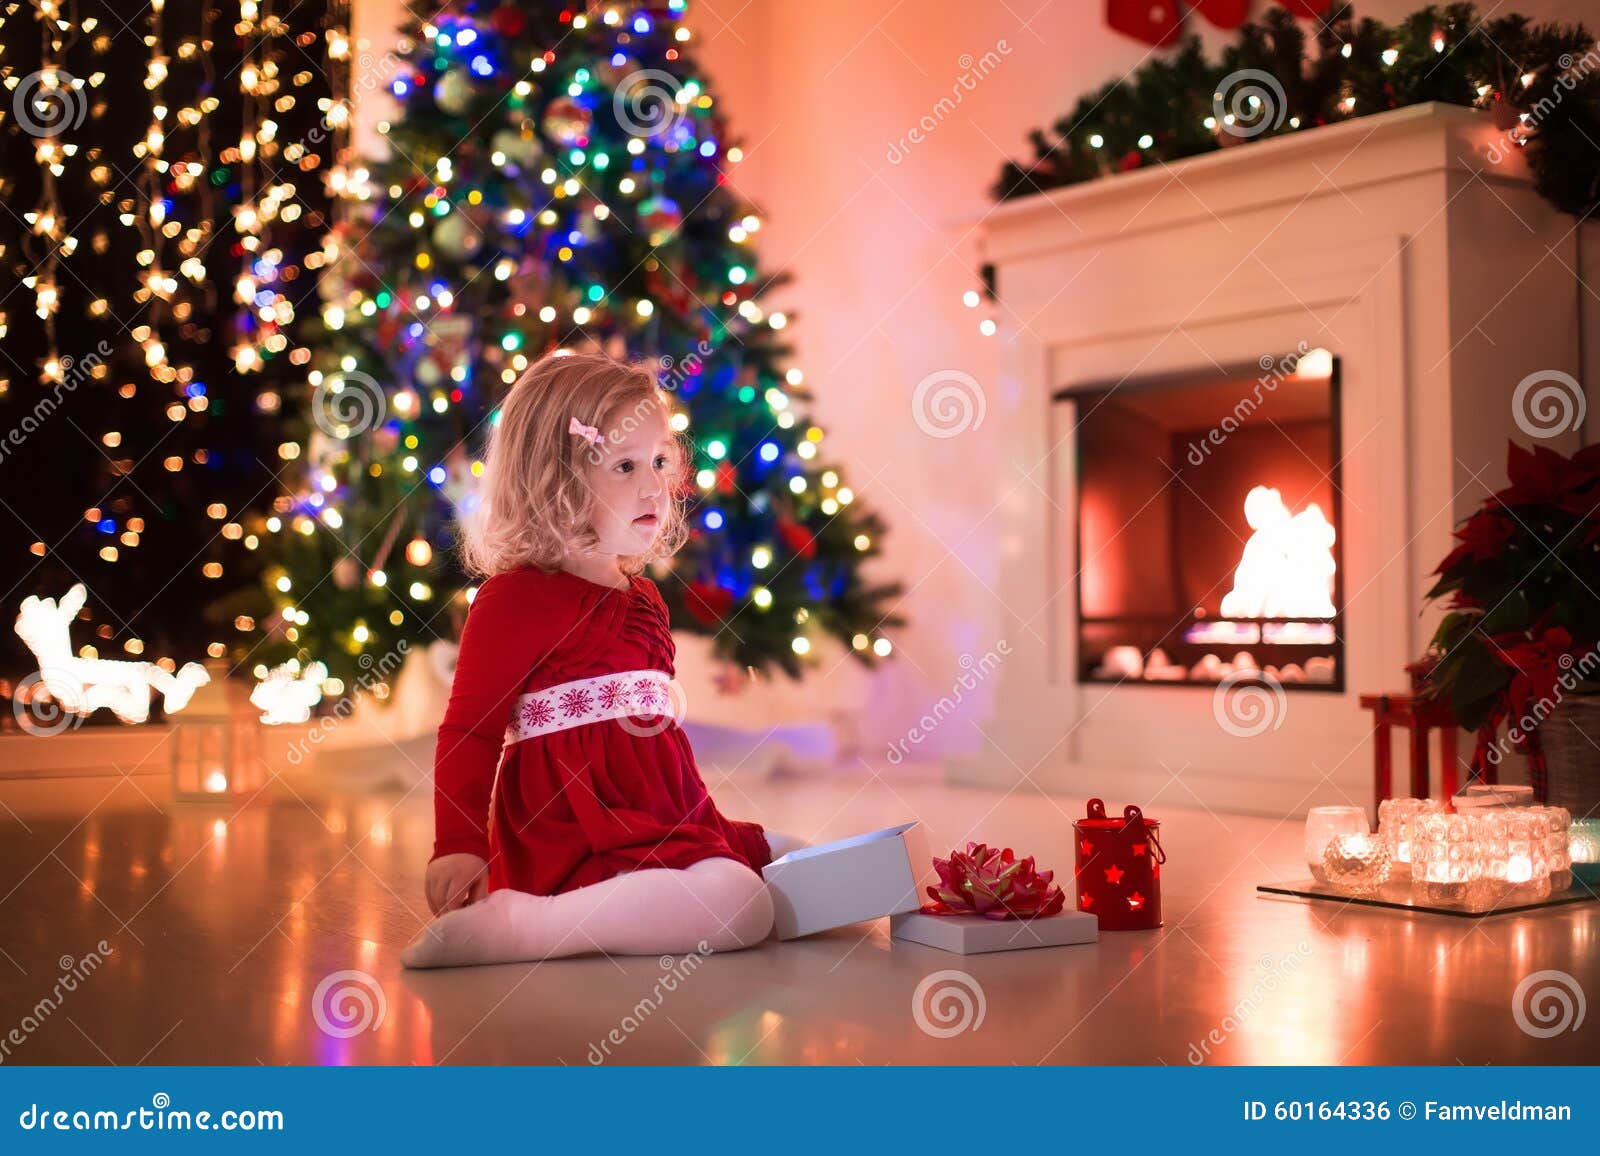 Little Girl Opening Christmas Presents At Fire Place Stock ...